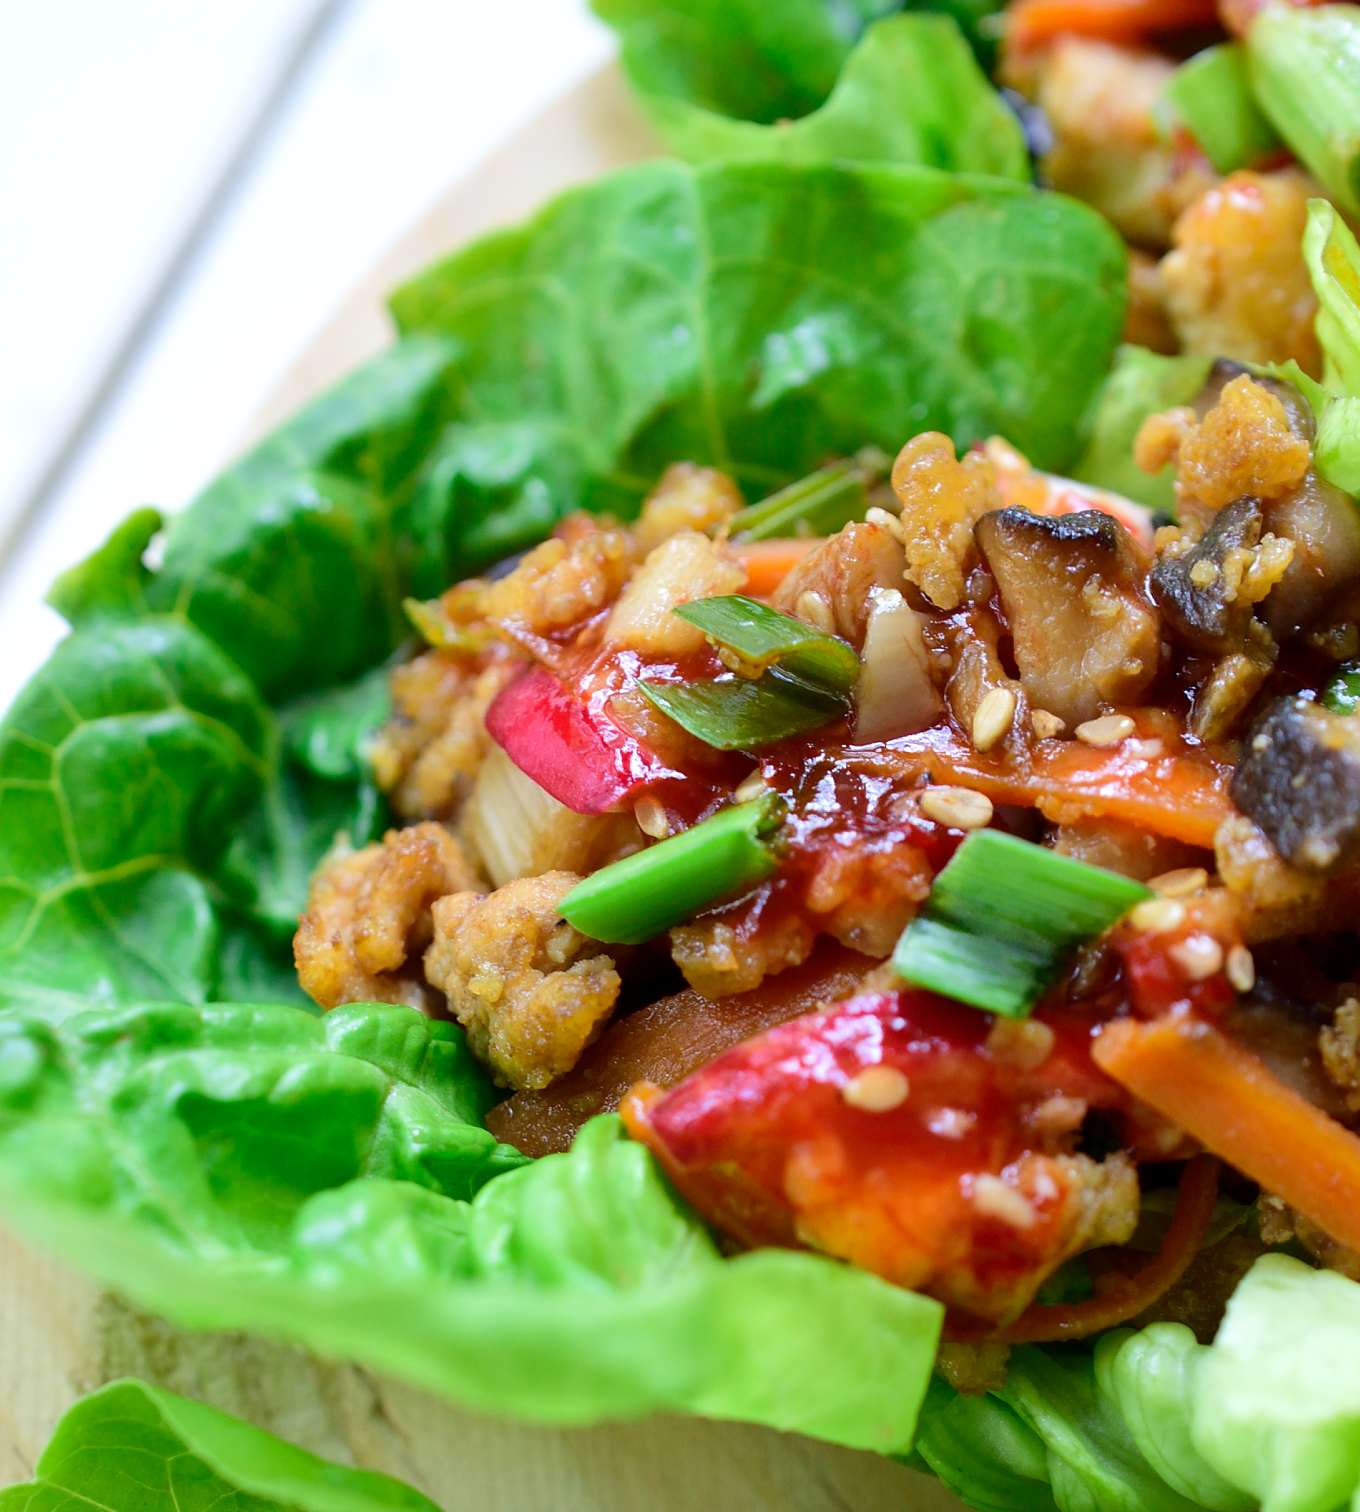 A very tasty lettuce wrap with various colorful veggies, mushroom and tofu